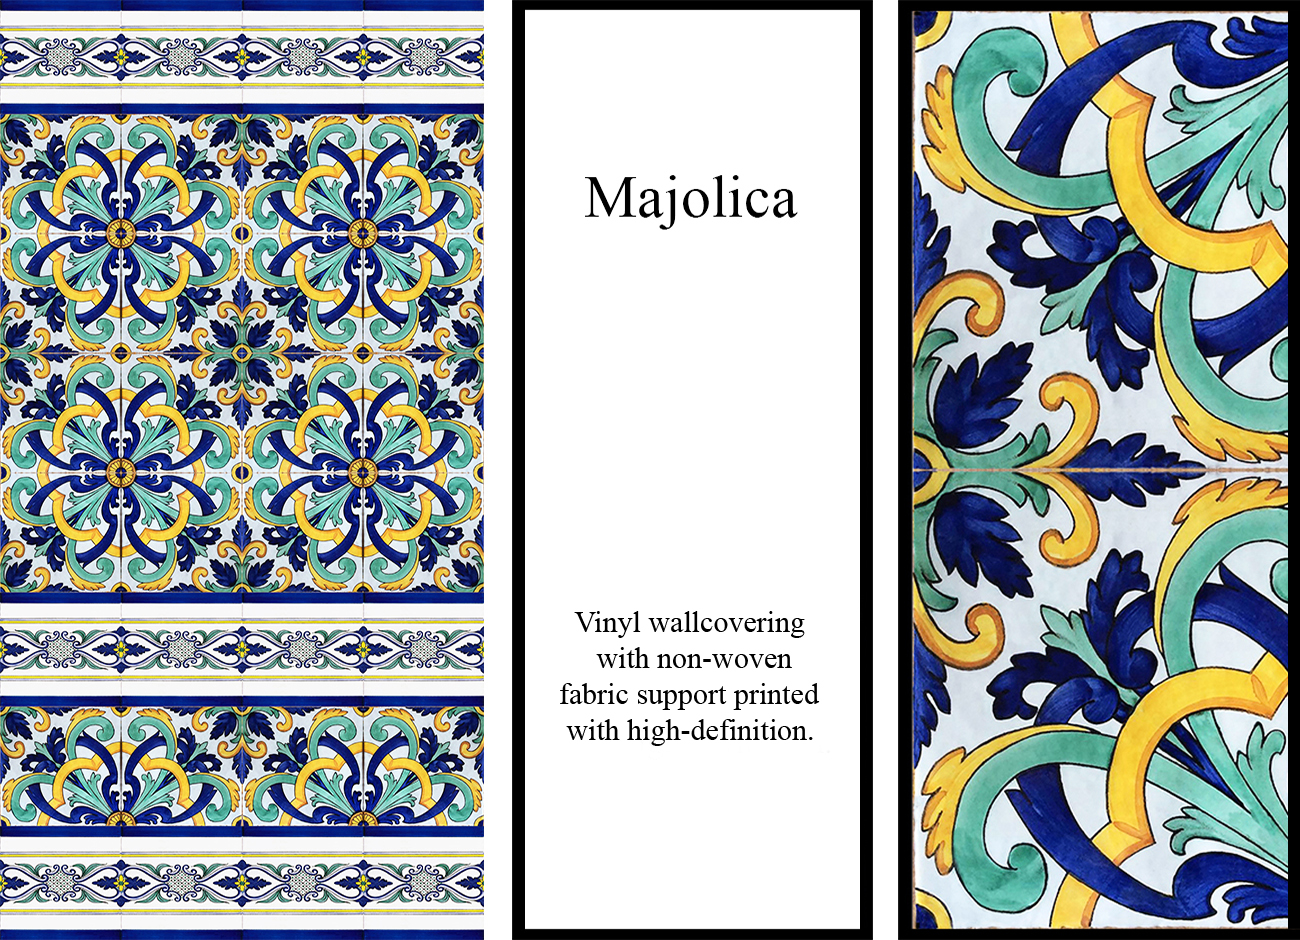 Wallpaper with majolica with floral texture in blue, green and yellow colors on a white background